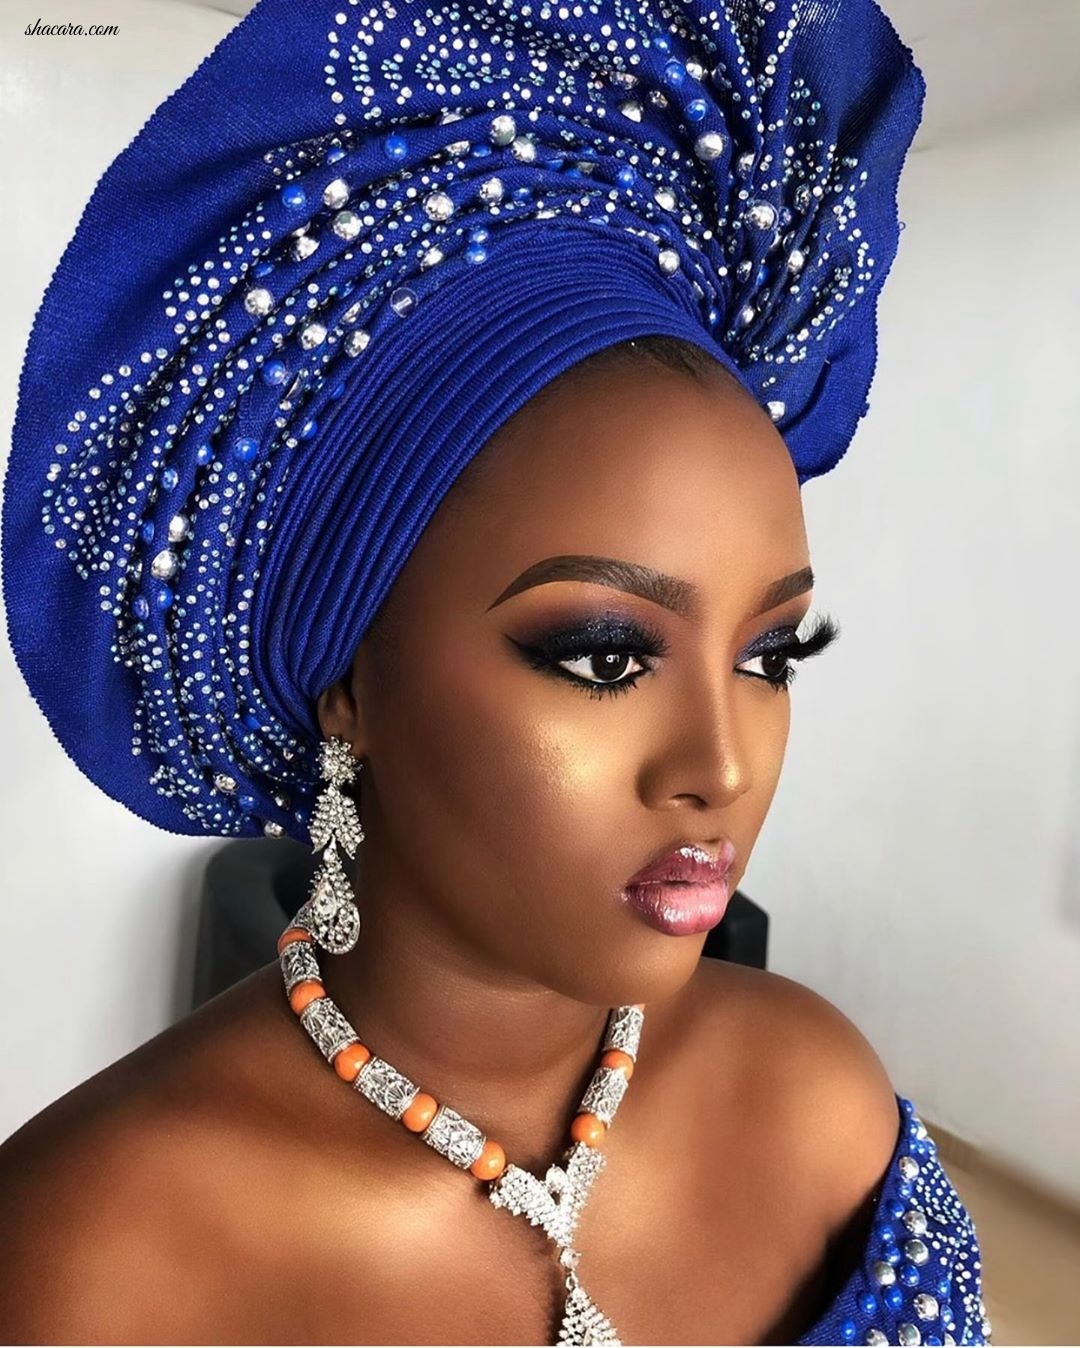 Taiwos Touch Is Creating Some Of The Best Gele’s With Fab Jewelry Styling Inspiration To Go With It